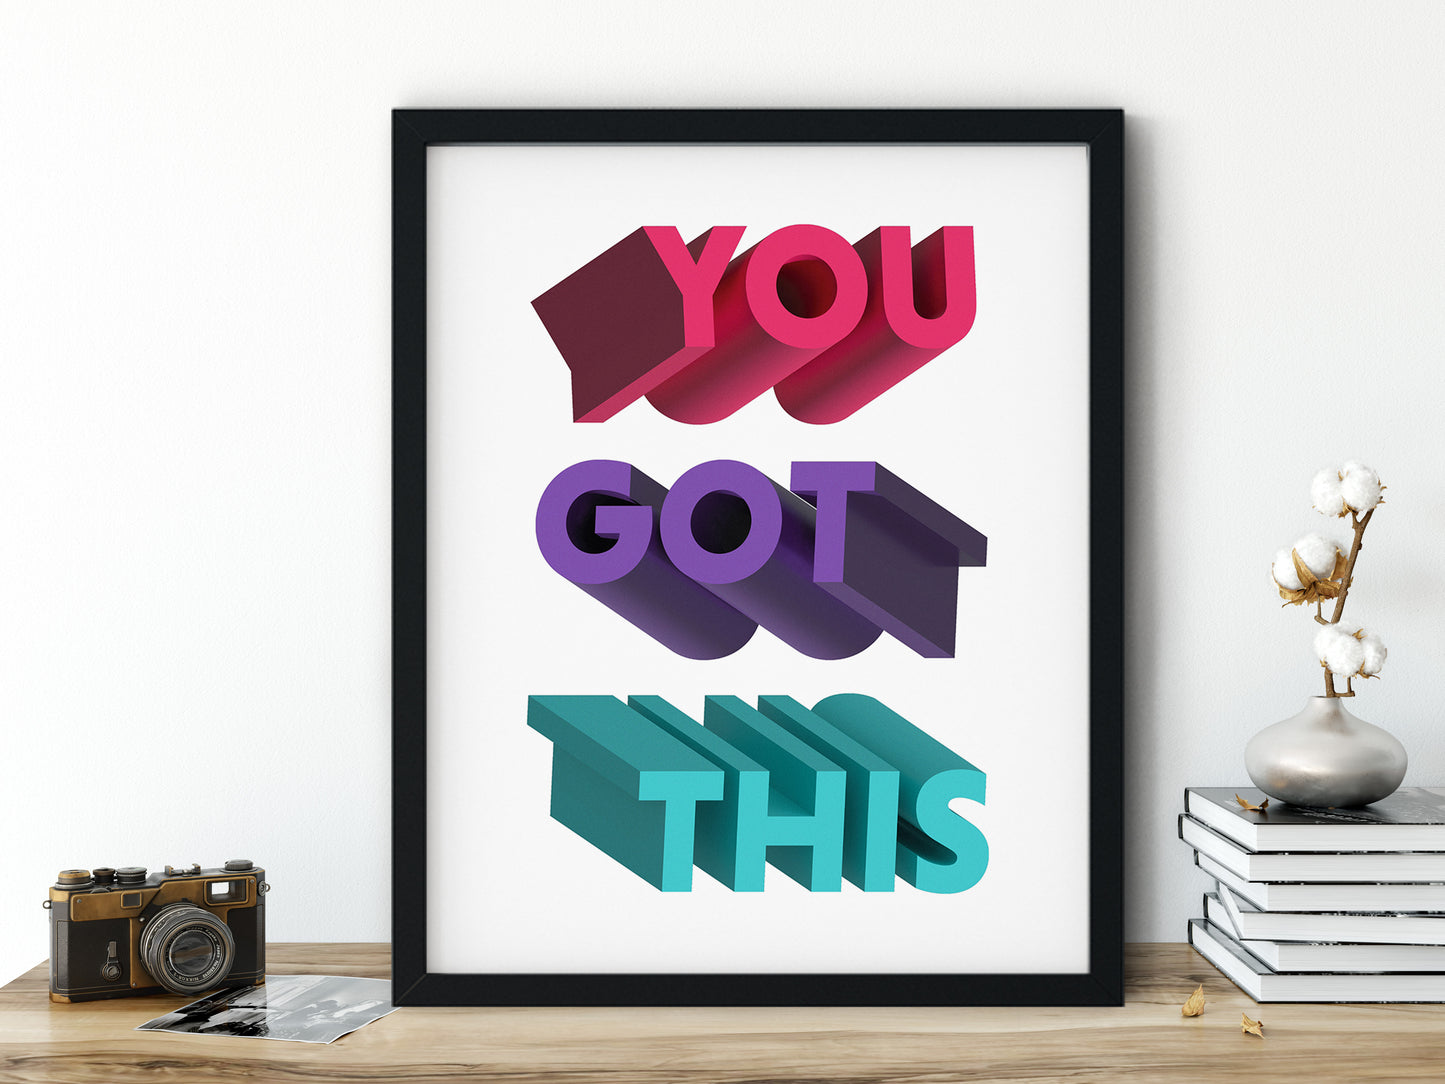 You Got This, Motivational Poster - Bold Color Typography